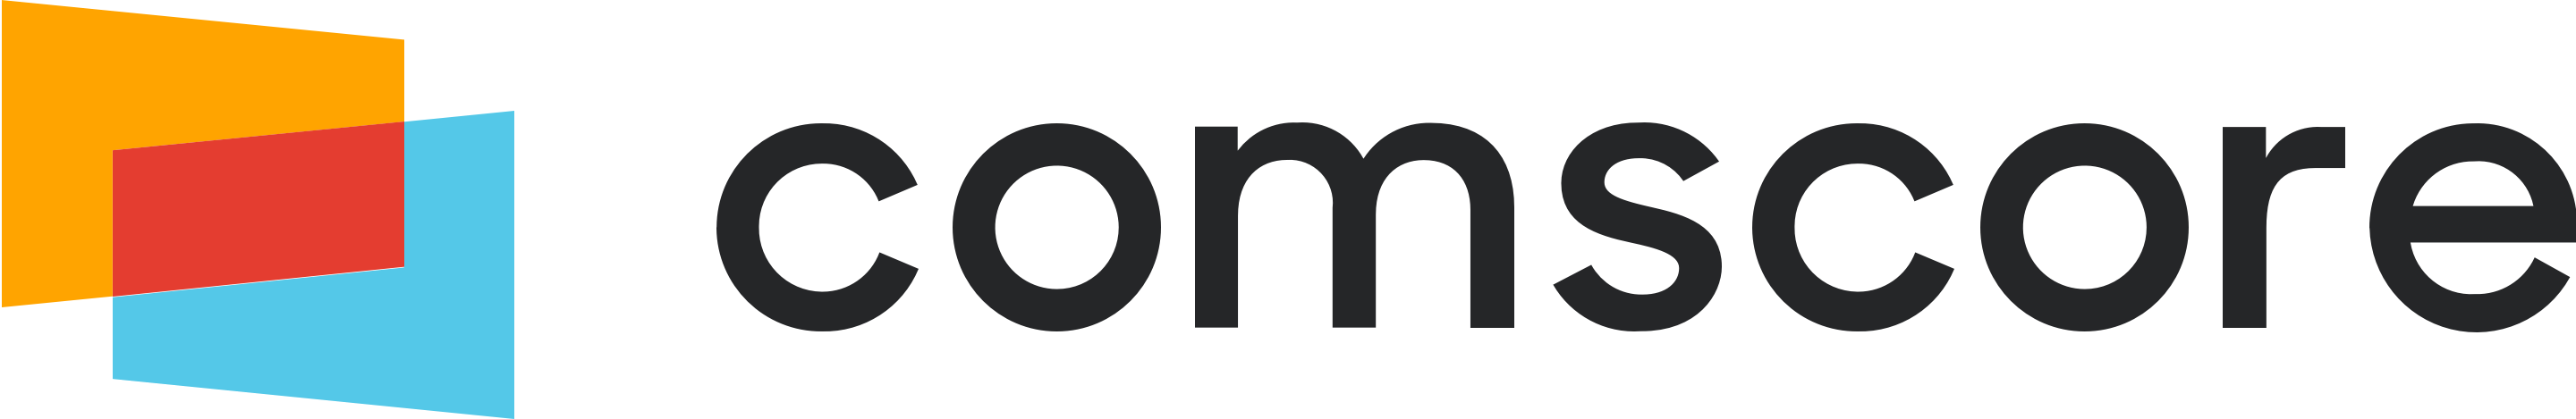 Logo for Comscore, a leading media measurement and analytics company that Filmbot integrates with